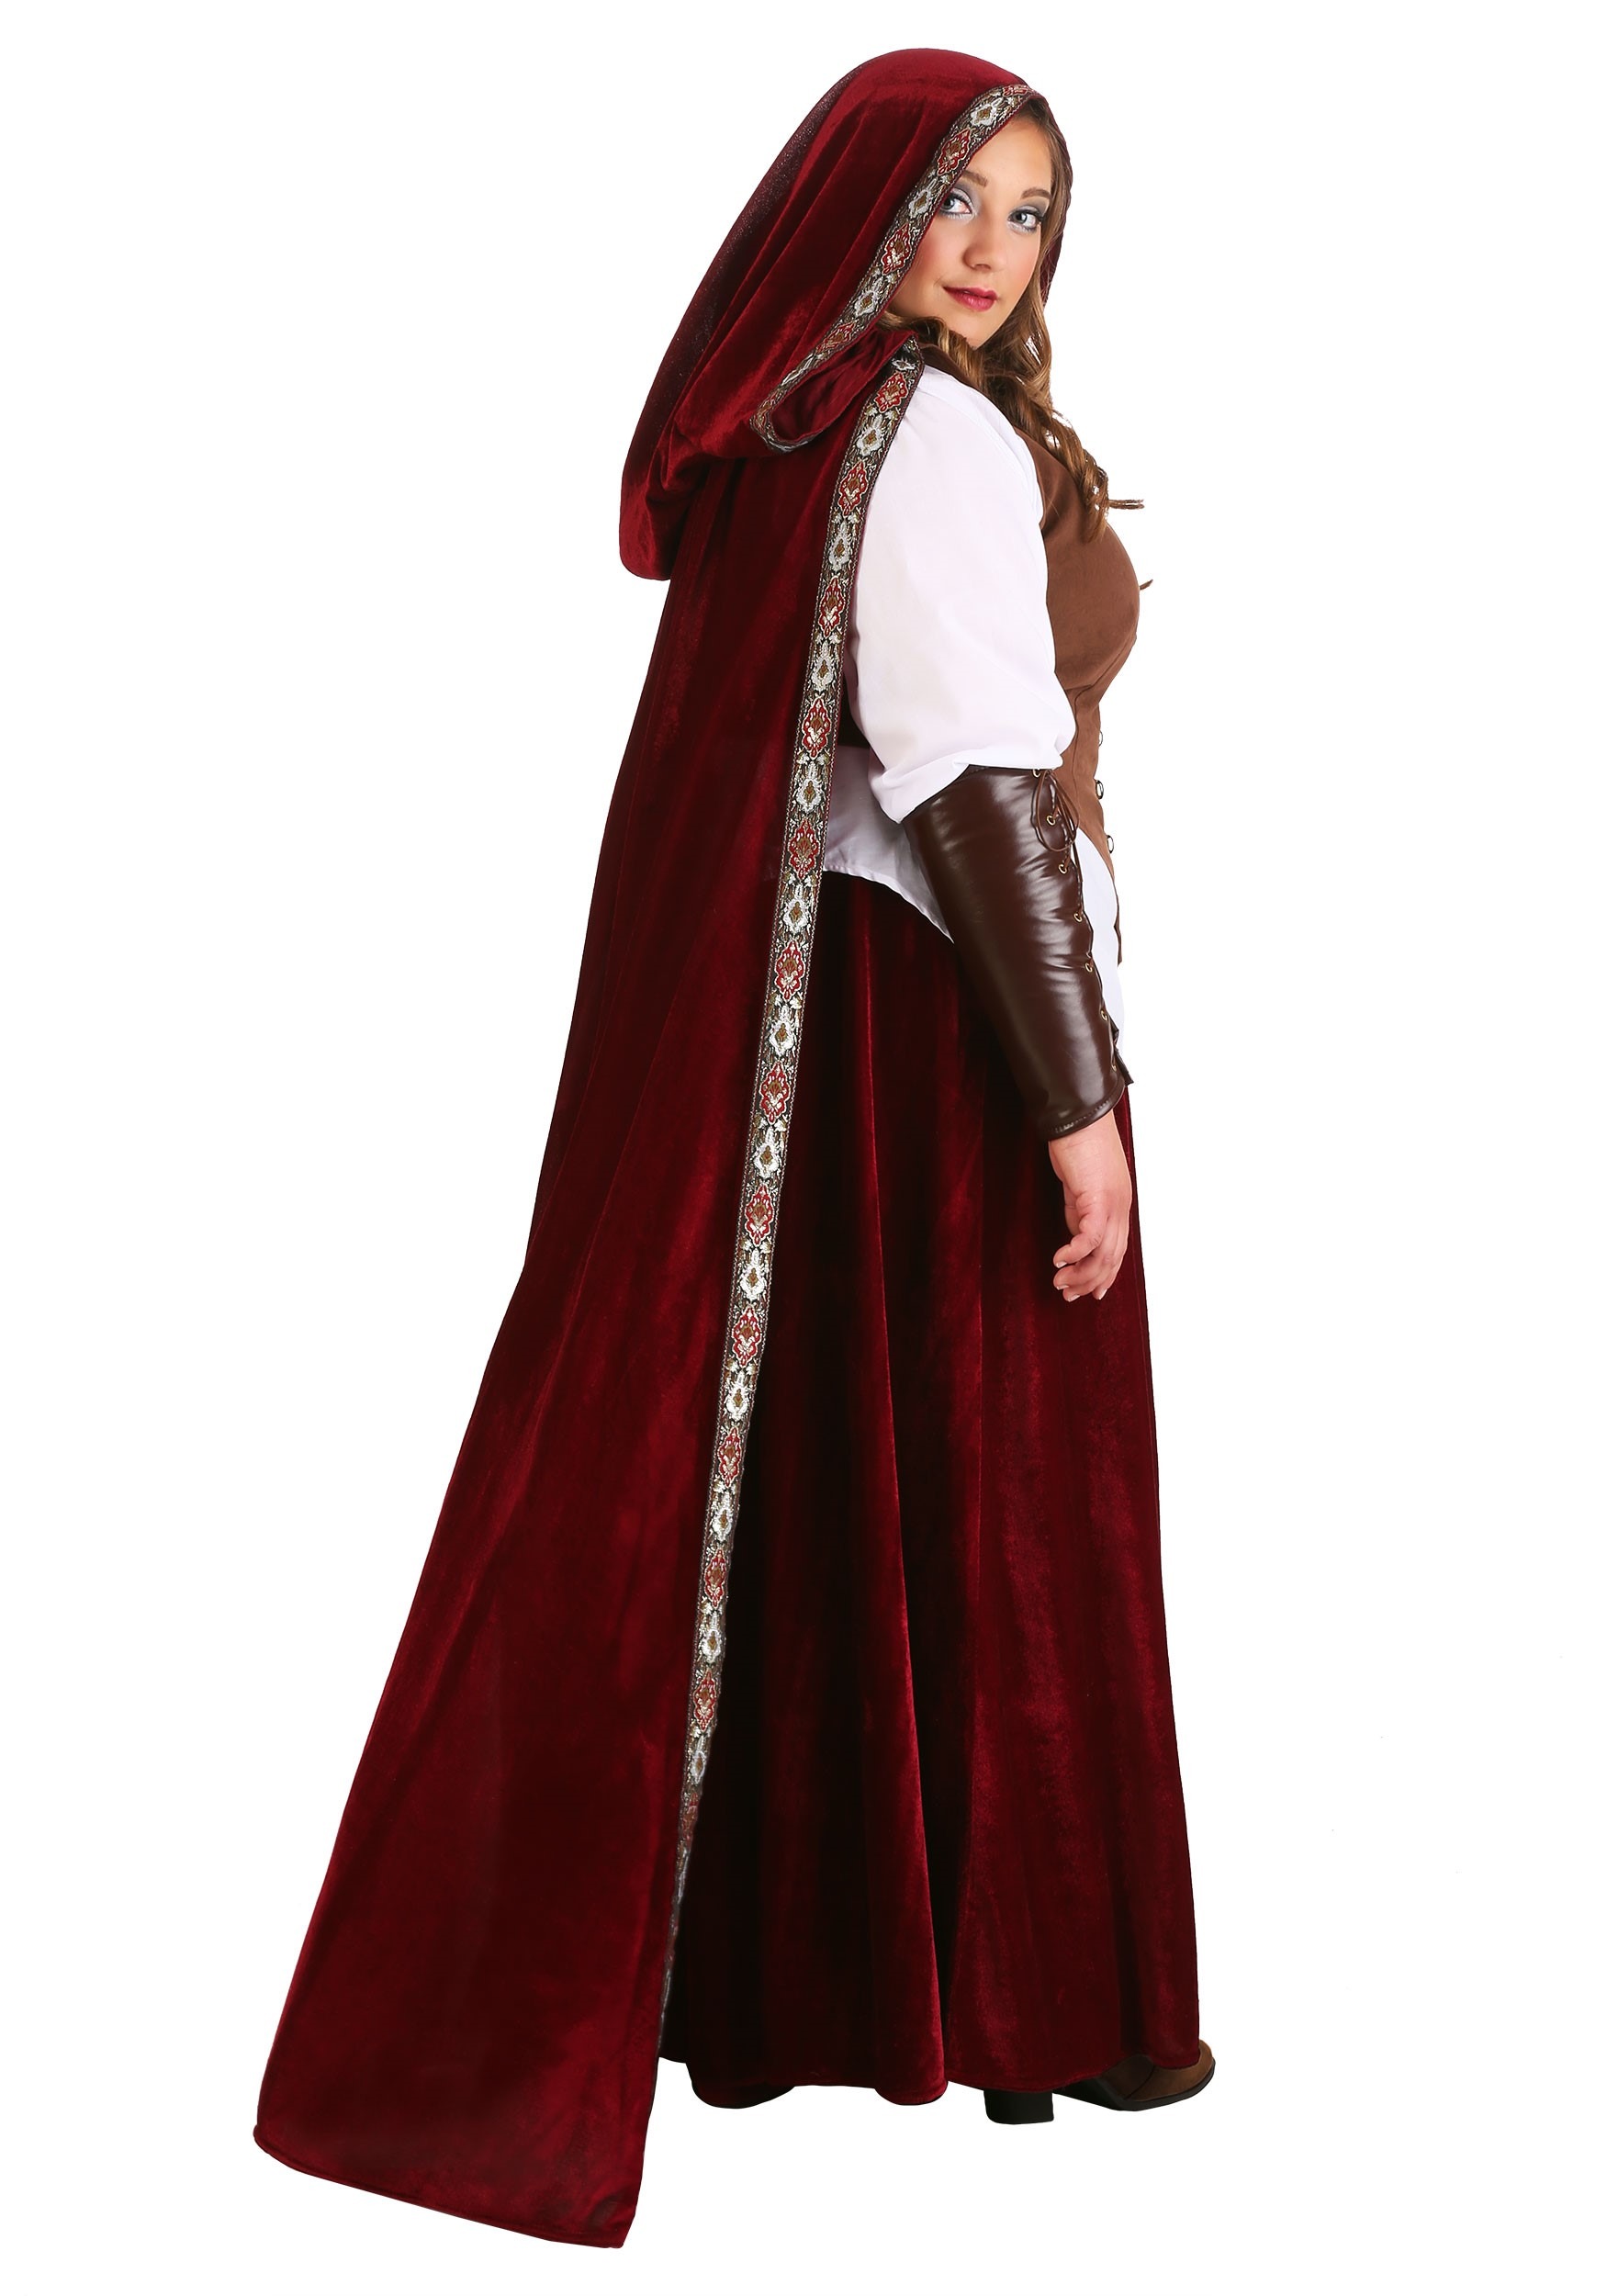 Get Plus Size Red Riding Hood Halloween Costumes Pics